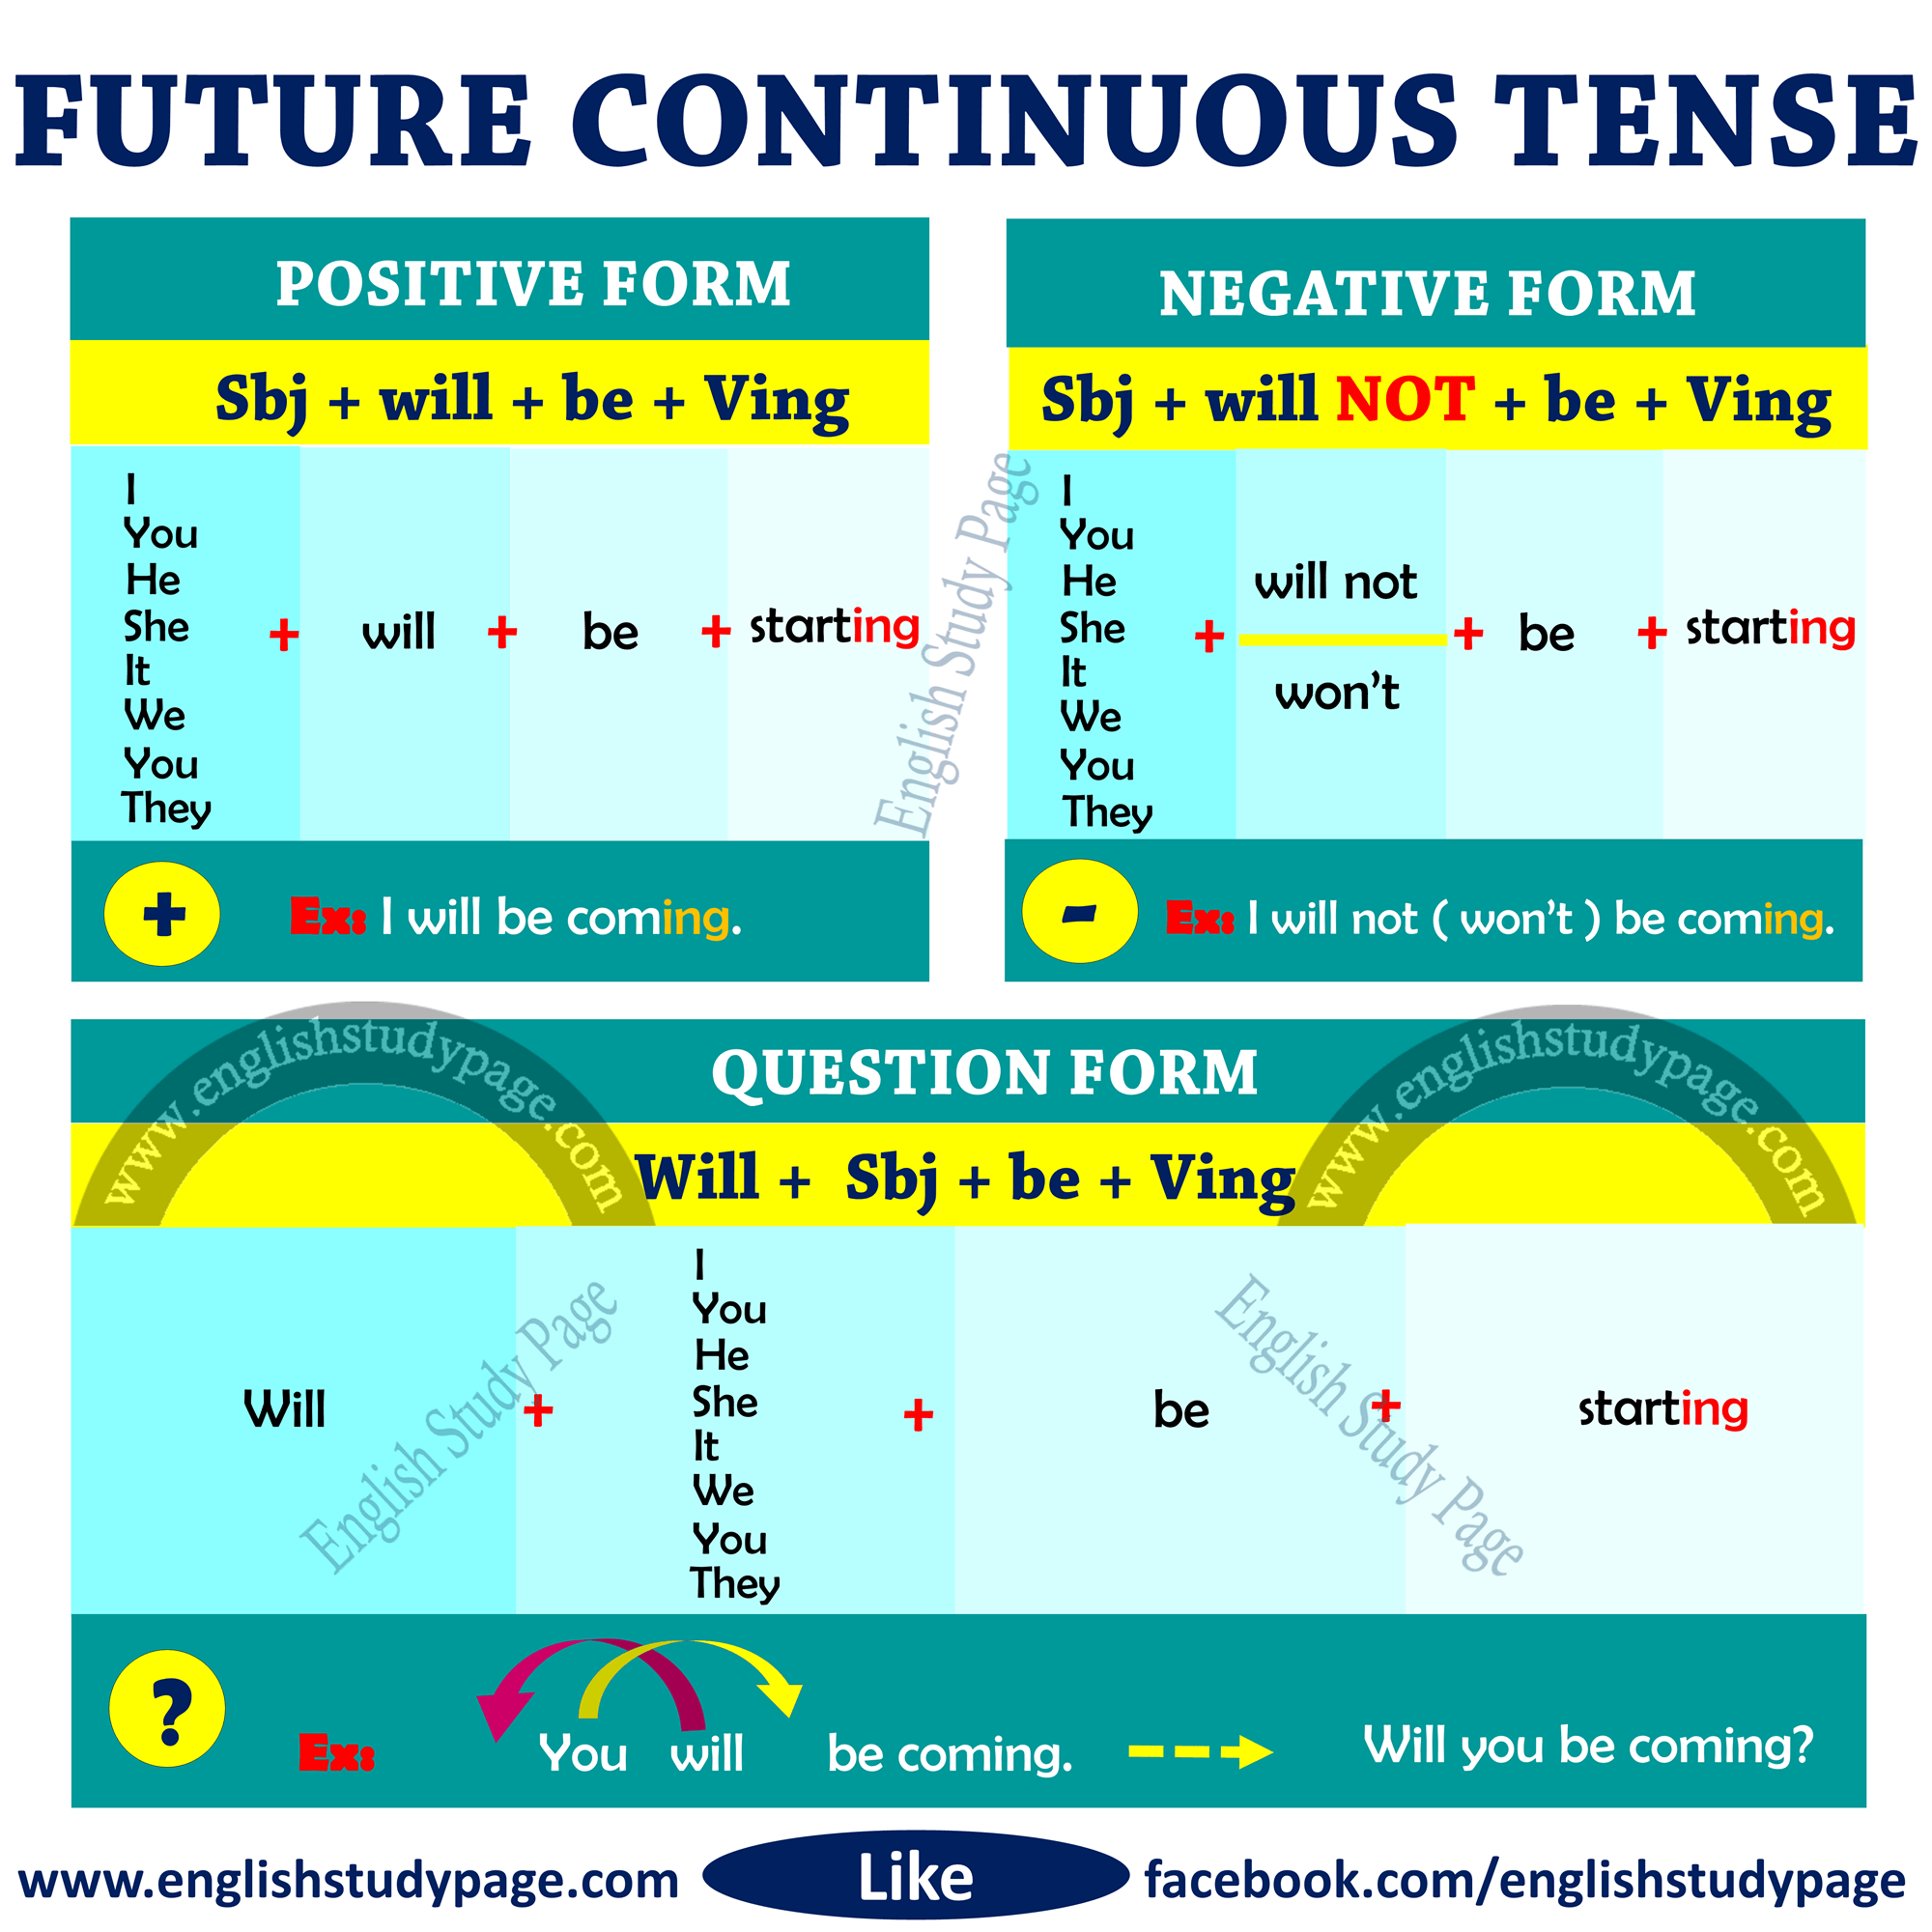 Structure of Future Continuous Tense - English Study Page
